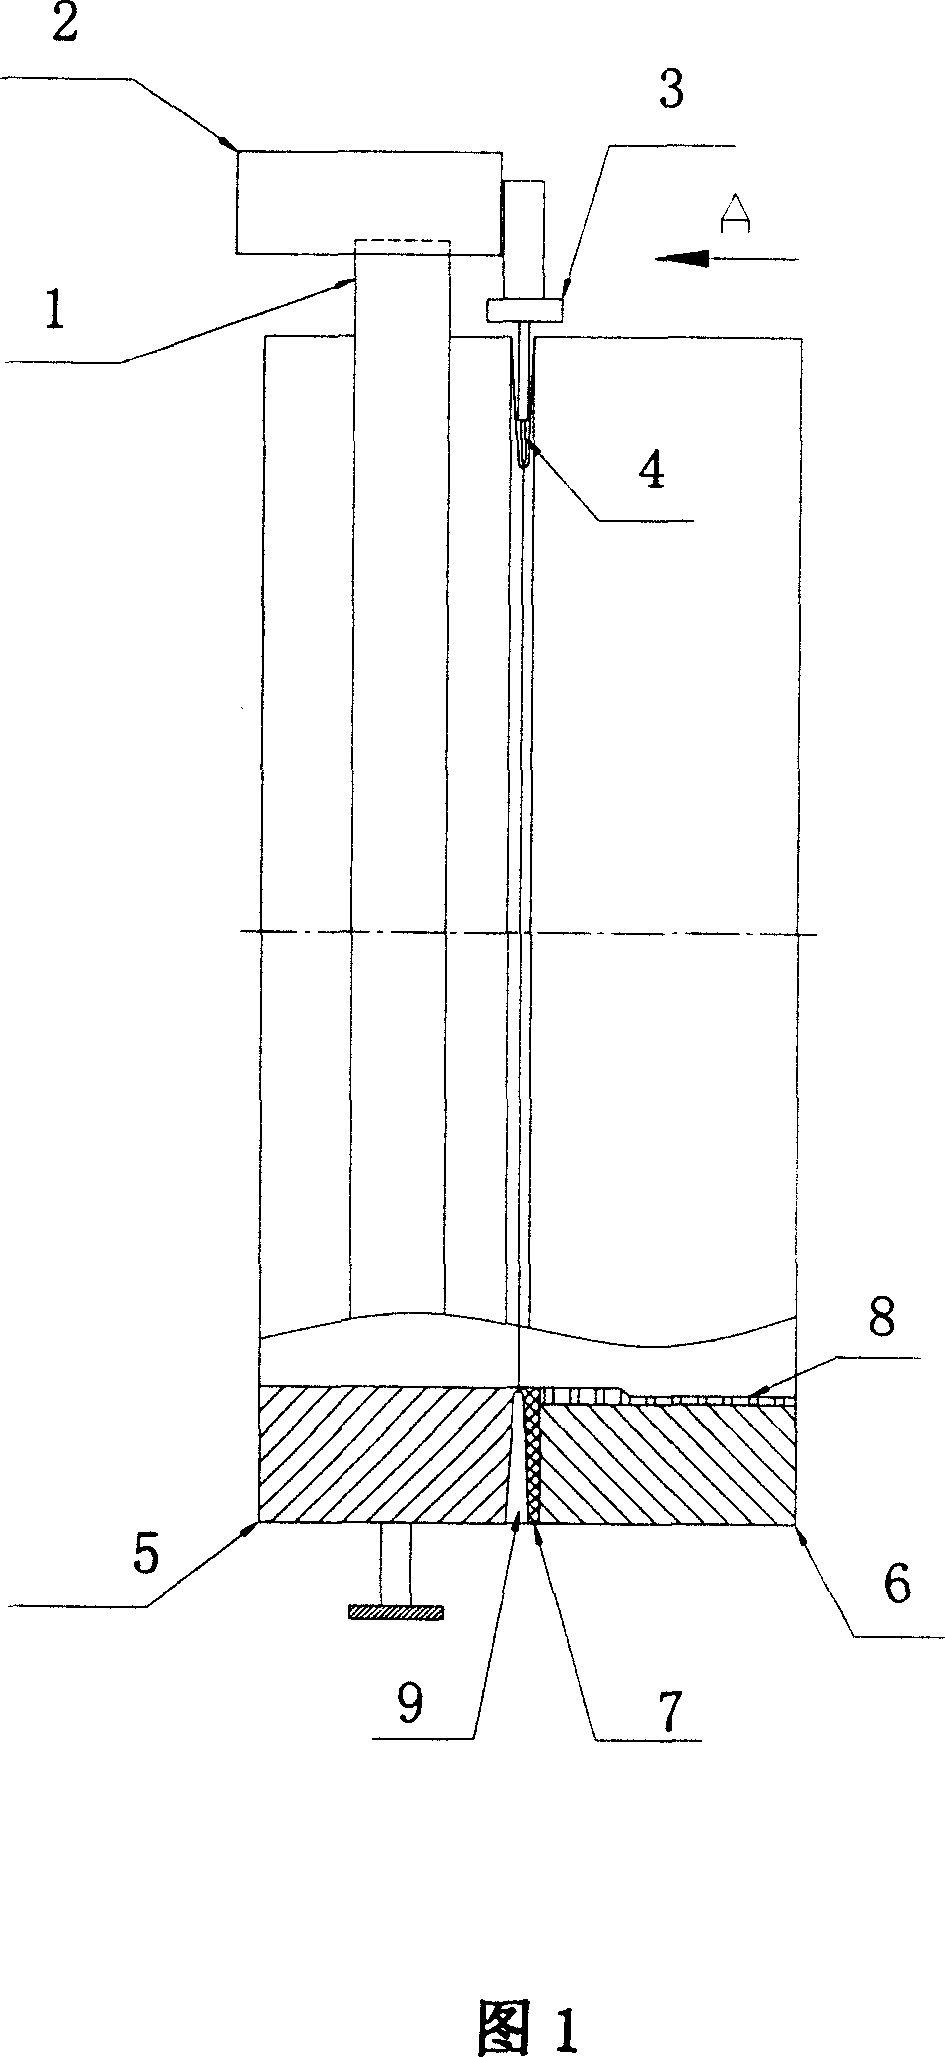 Narrow-gap all position pusle automatic argon arc welding technique for dissimillar nicklel-based alloys